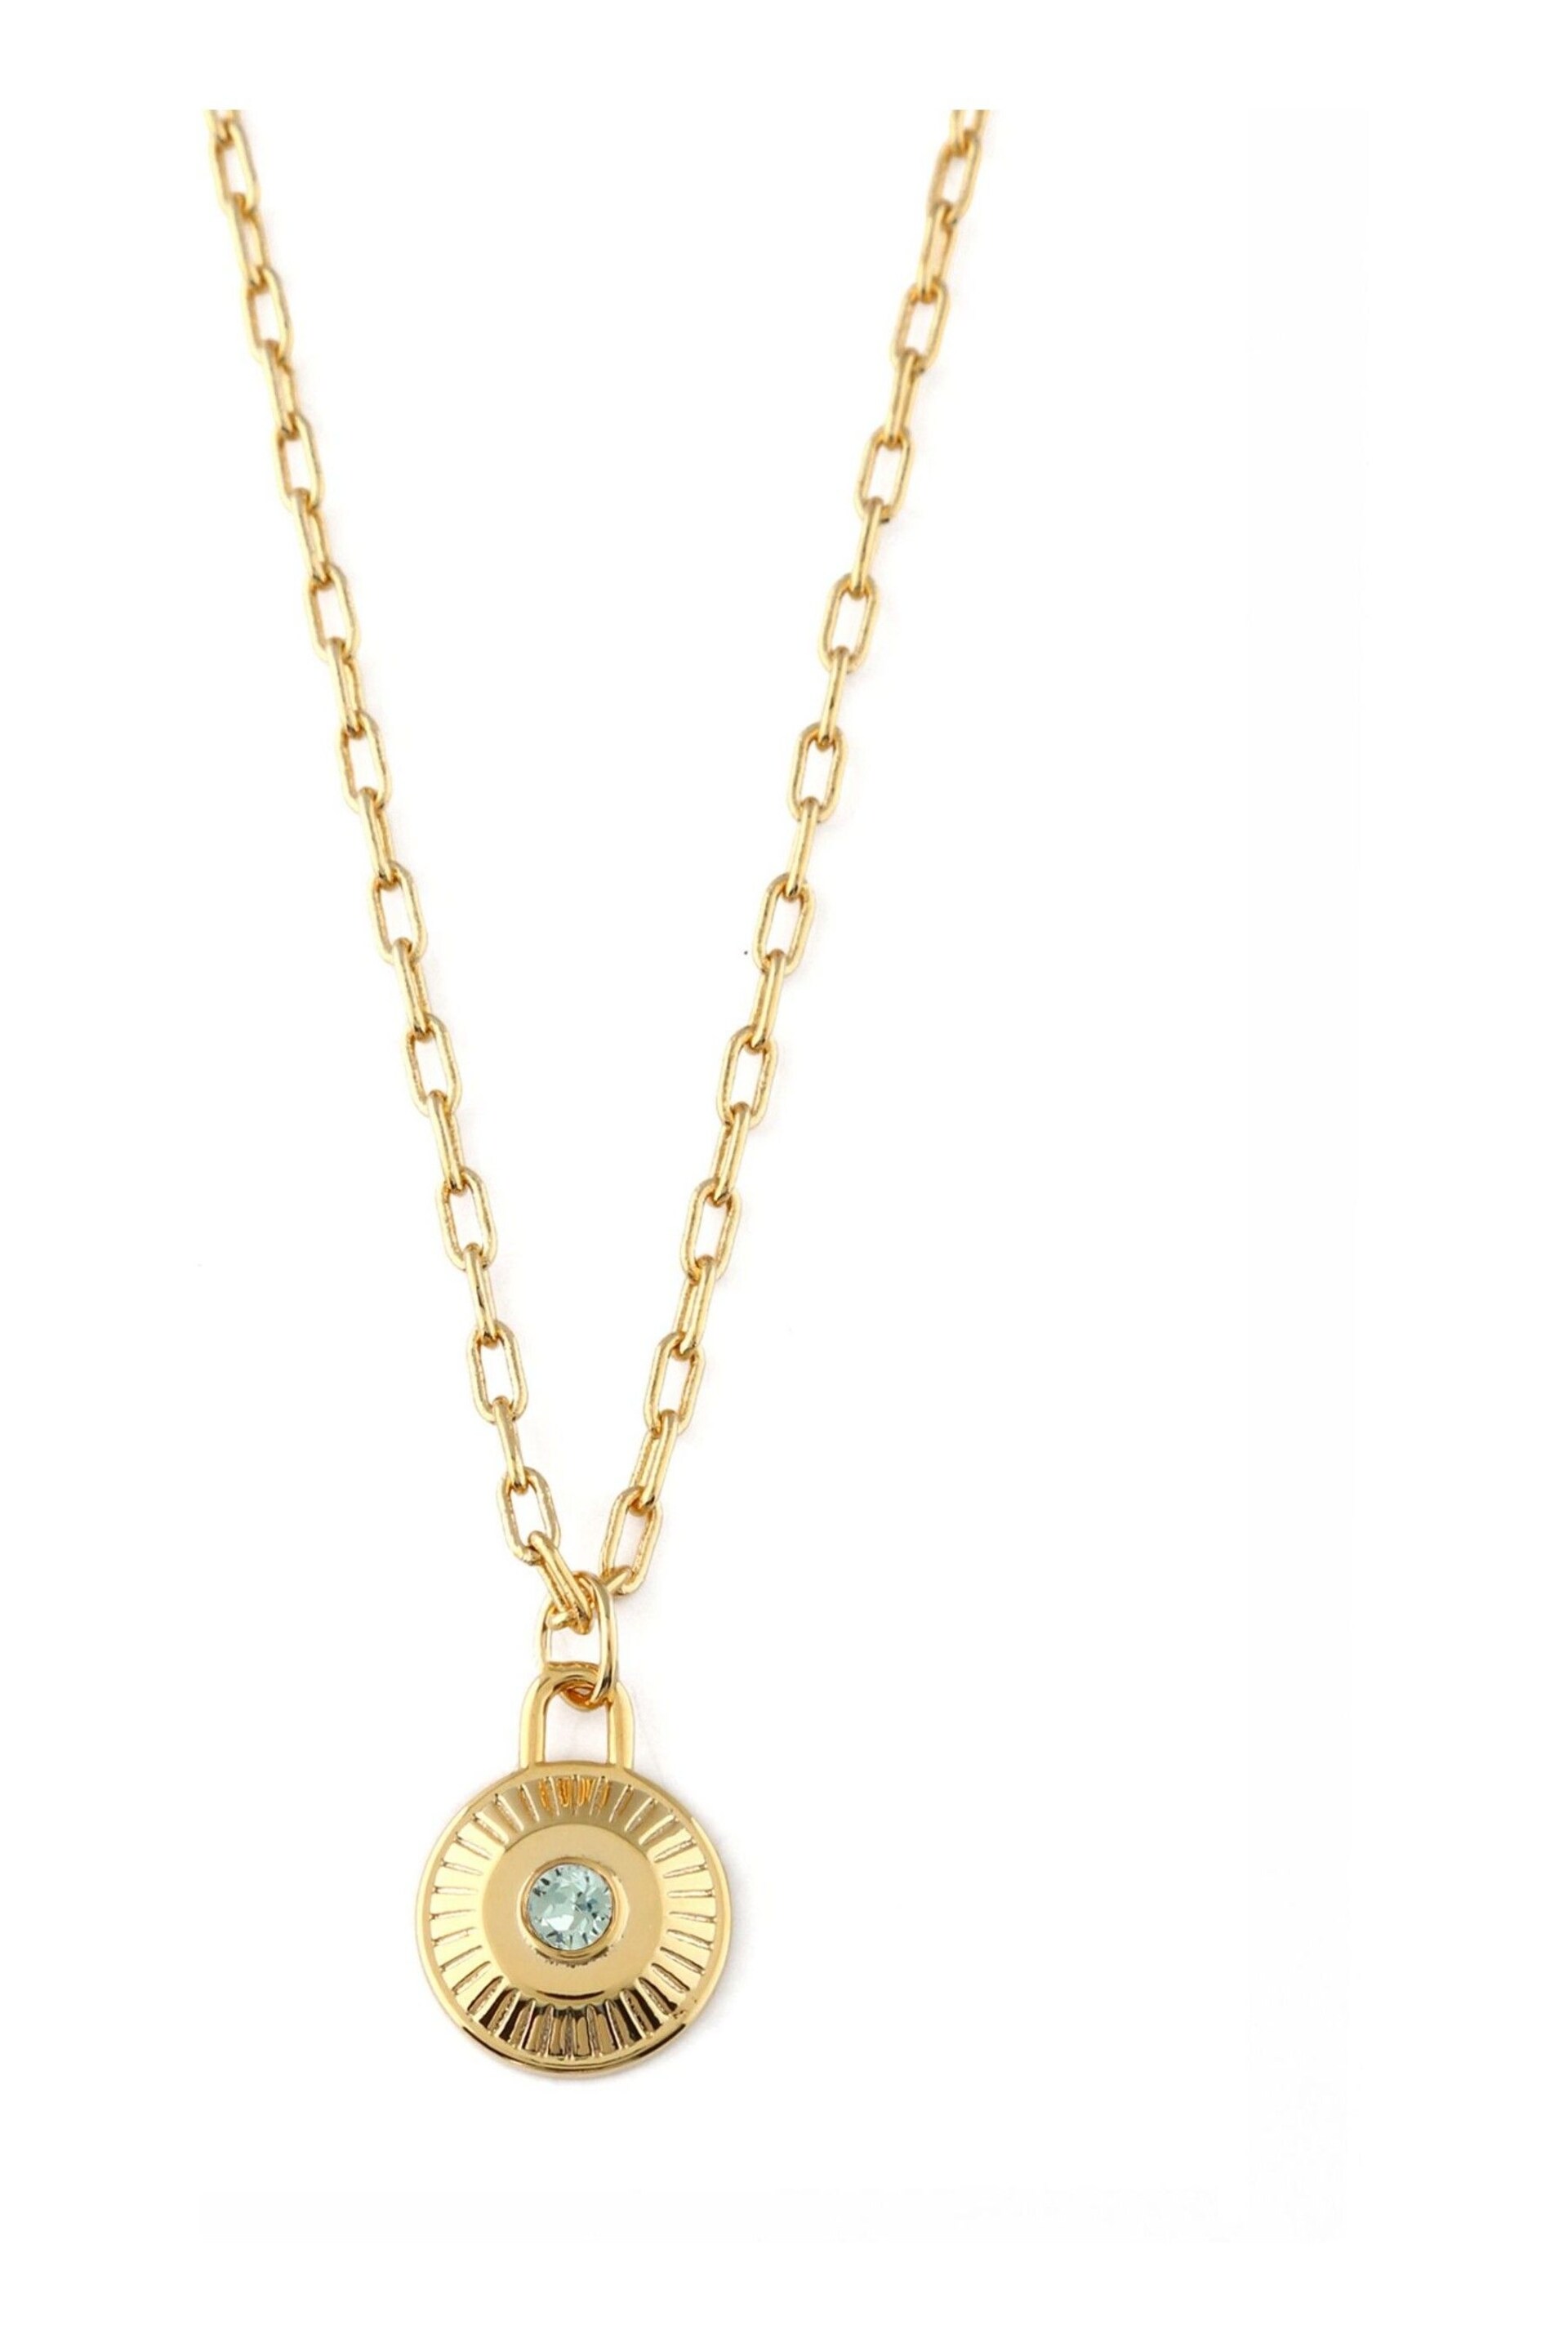 Orelia London August Births Disc Necklace - Image 1 of 1